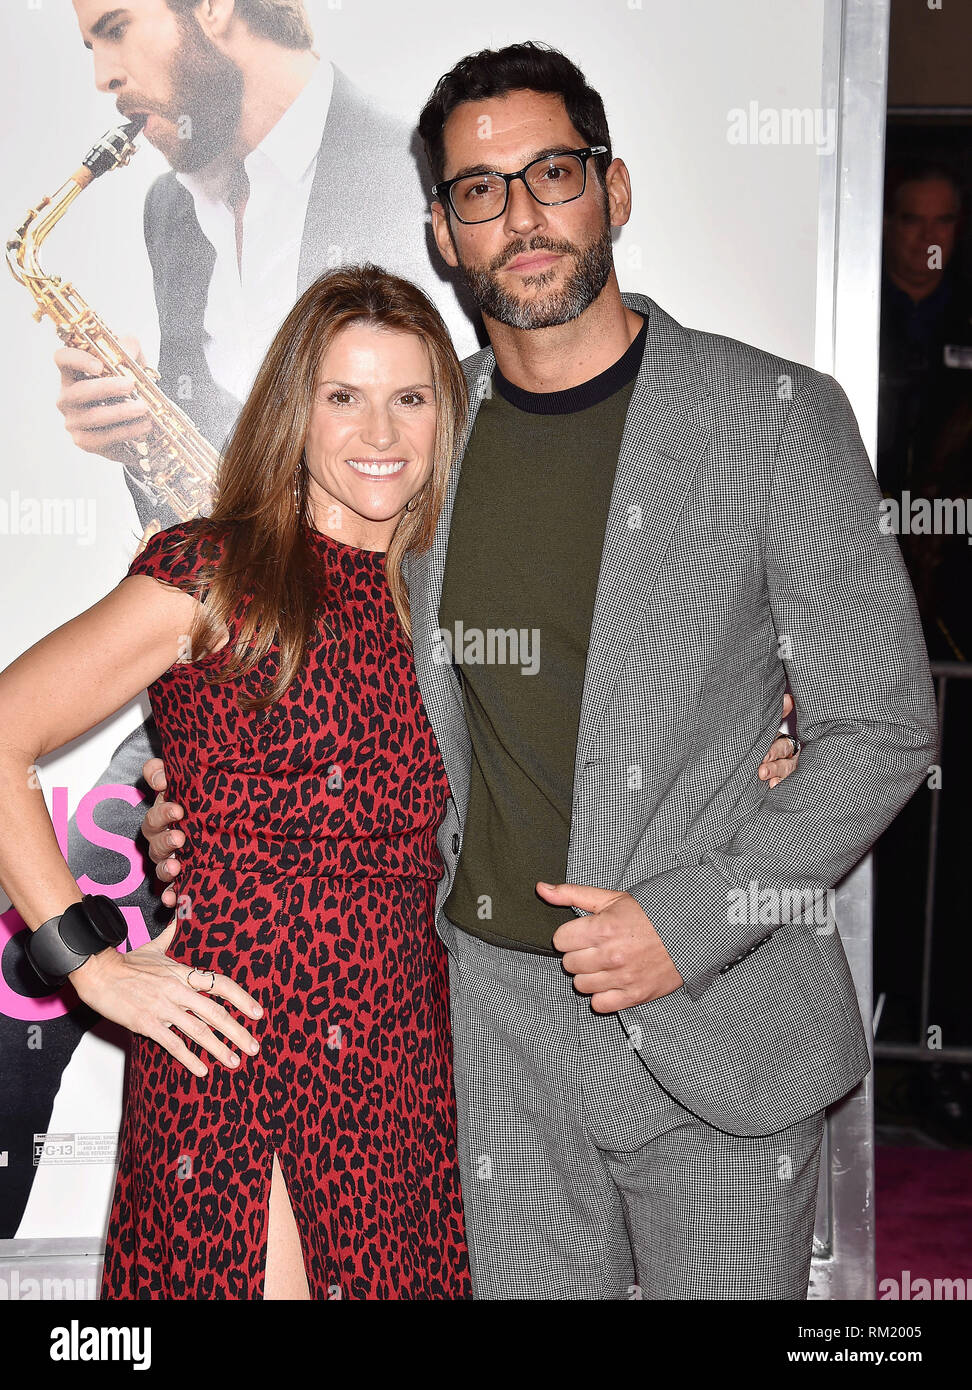 LOS ANGELES, CA - FEBRUARY 11: Gina Matthews (L) and Tom Ellis arrive at the Premiere Of Warner Bros. Pictures' 'Isn't It Romantic' at The Theatre at  Stock Photo